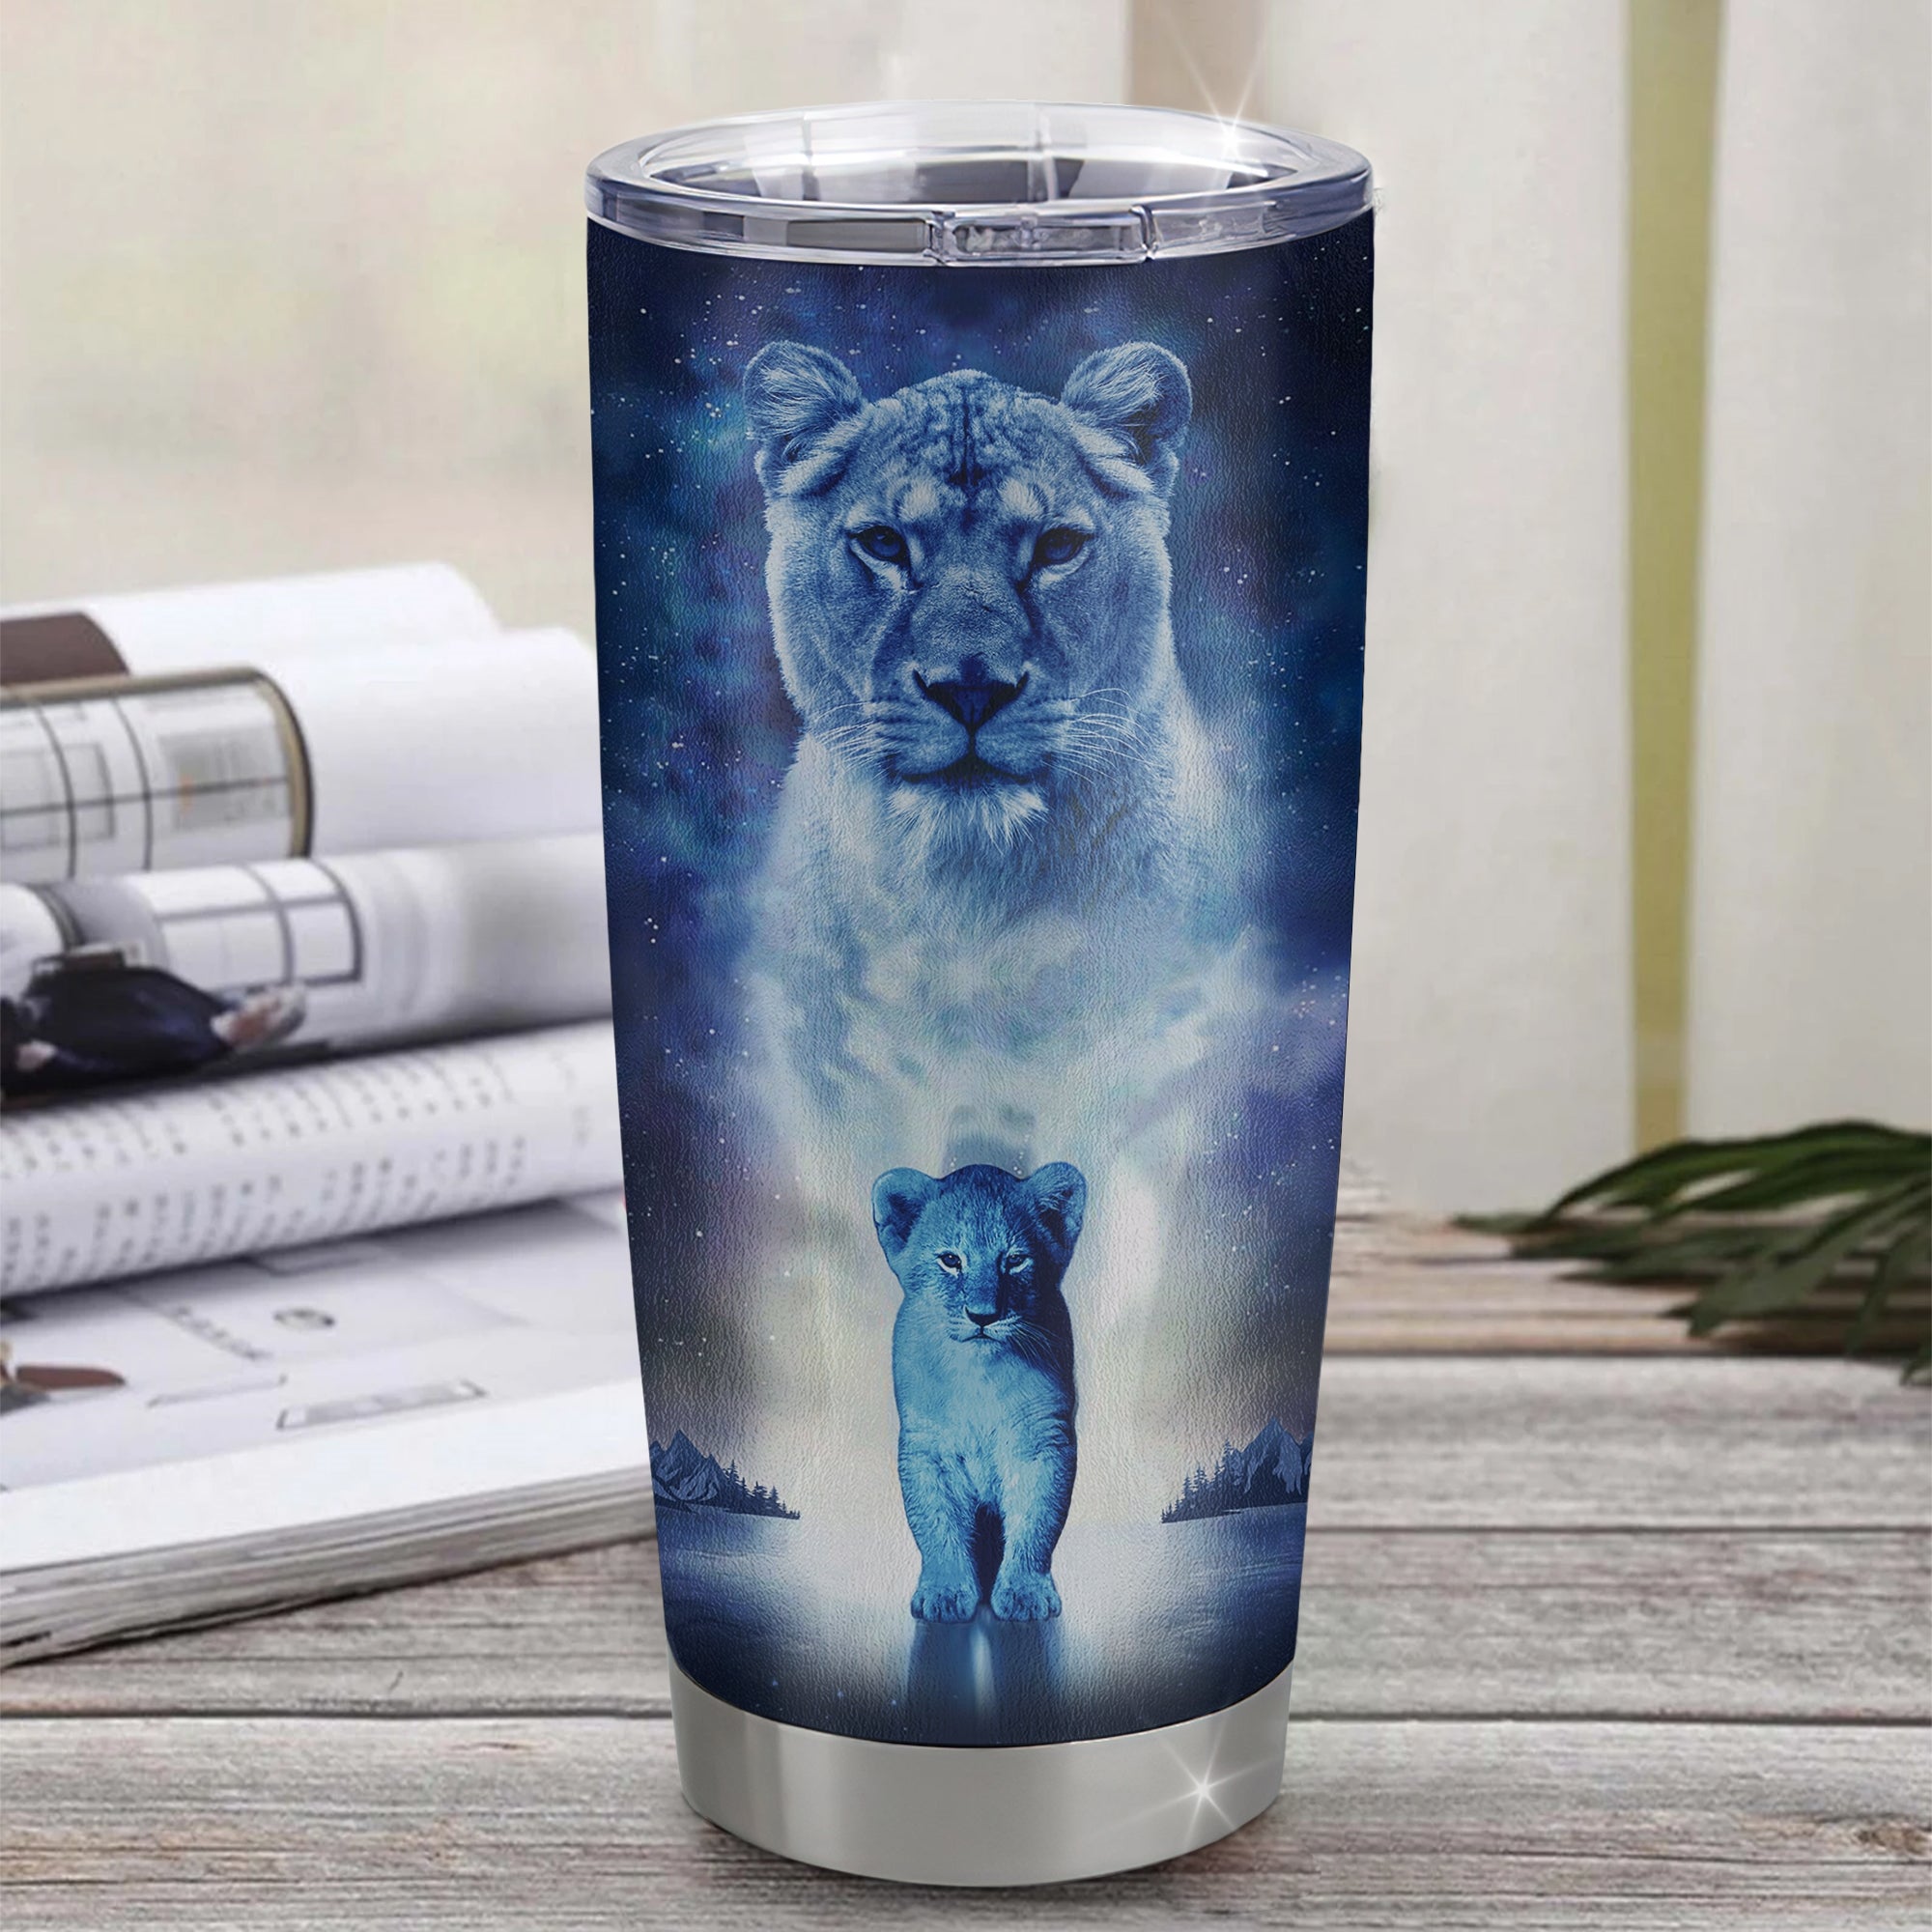 Personalized_To_My_Daughter_Lion_From_Mom_Mother_Stainless_Steel_Tumbler_Cup_Every_Day_Laugh_Love_Live_Daughter_Birthday_Graduation_Christmas_Travel_Mug_Tumbler_mockup_1.jpg